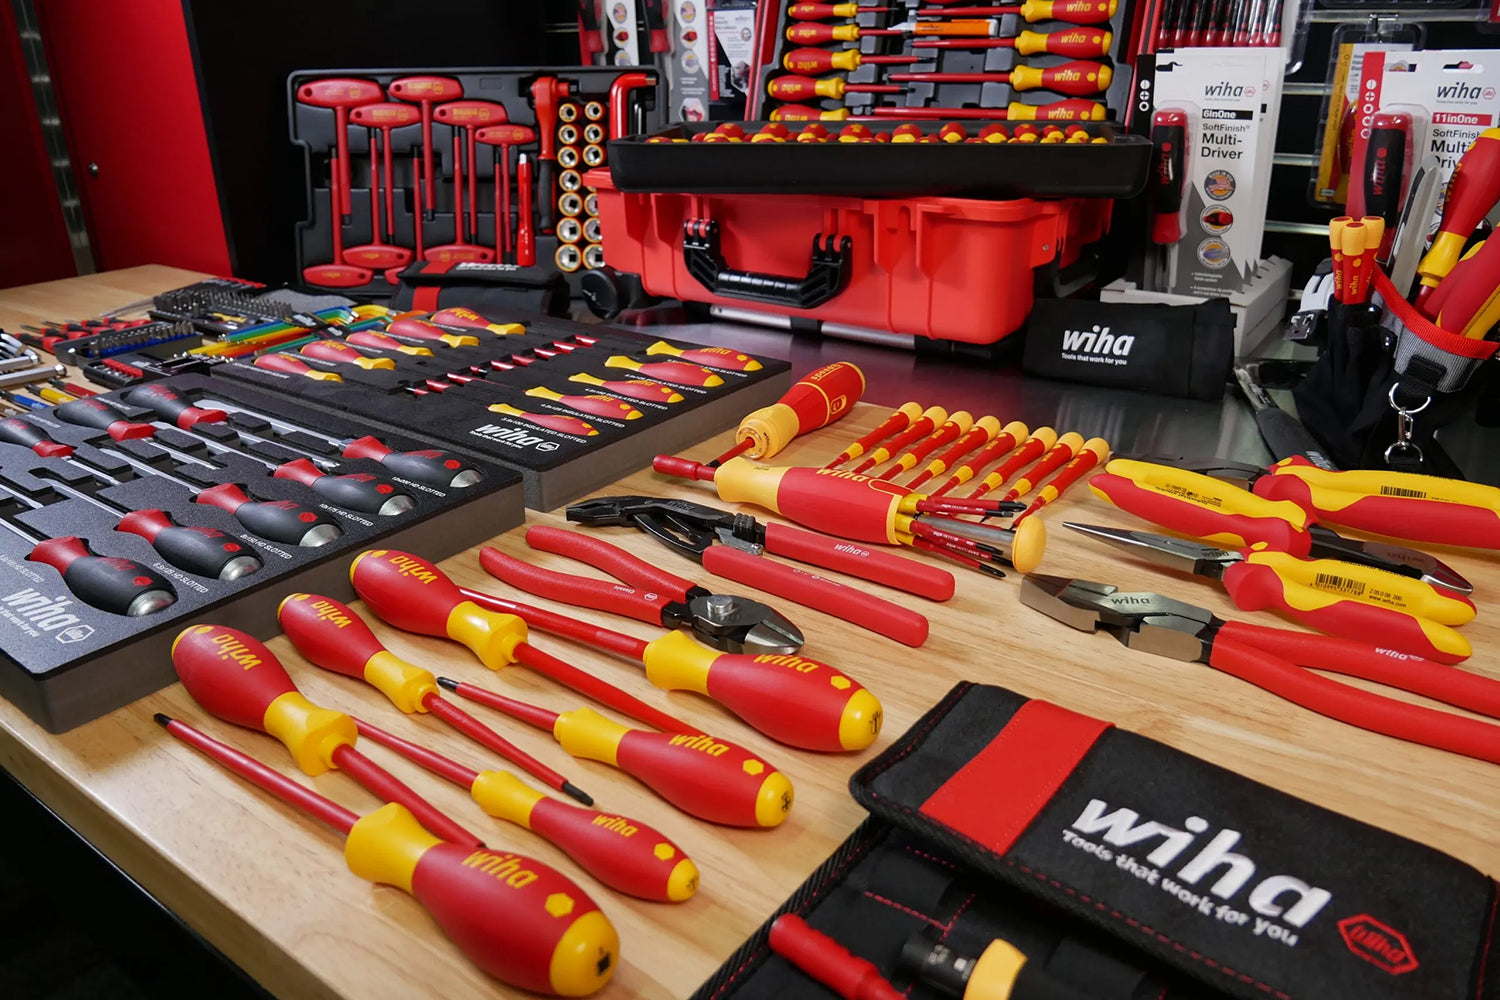 The Complete Guide to Insulated Electrical Tool Sets